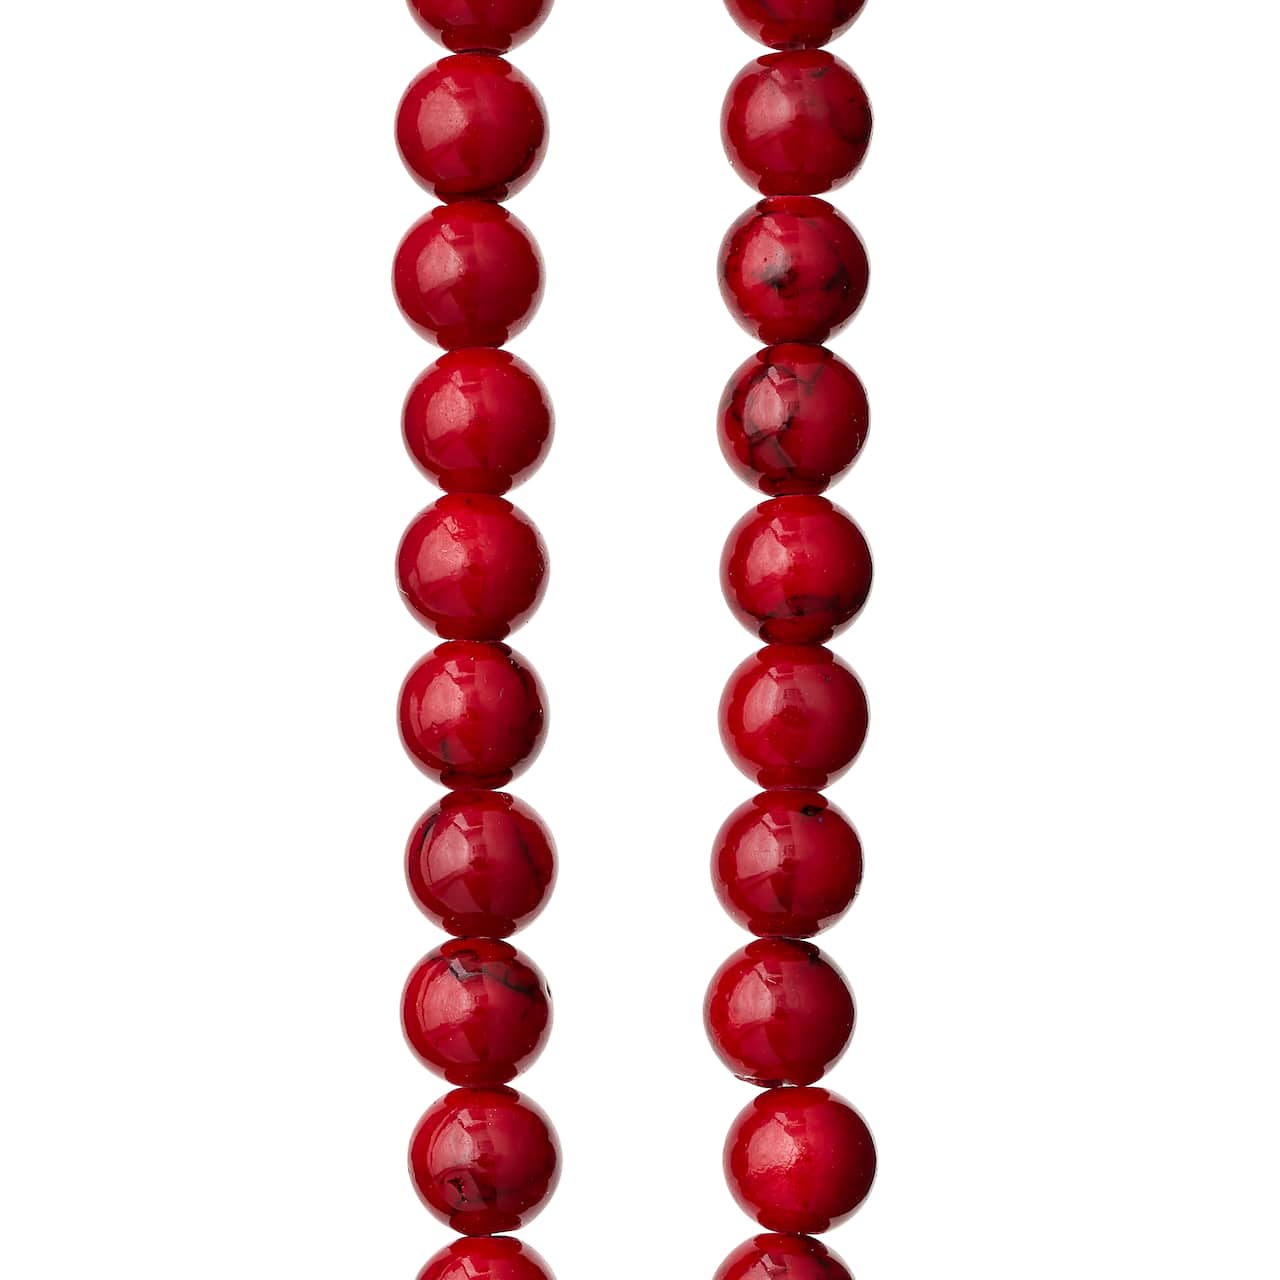 Eagle Claw Lazer Faceted Glass Beads 8mm Red